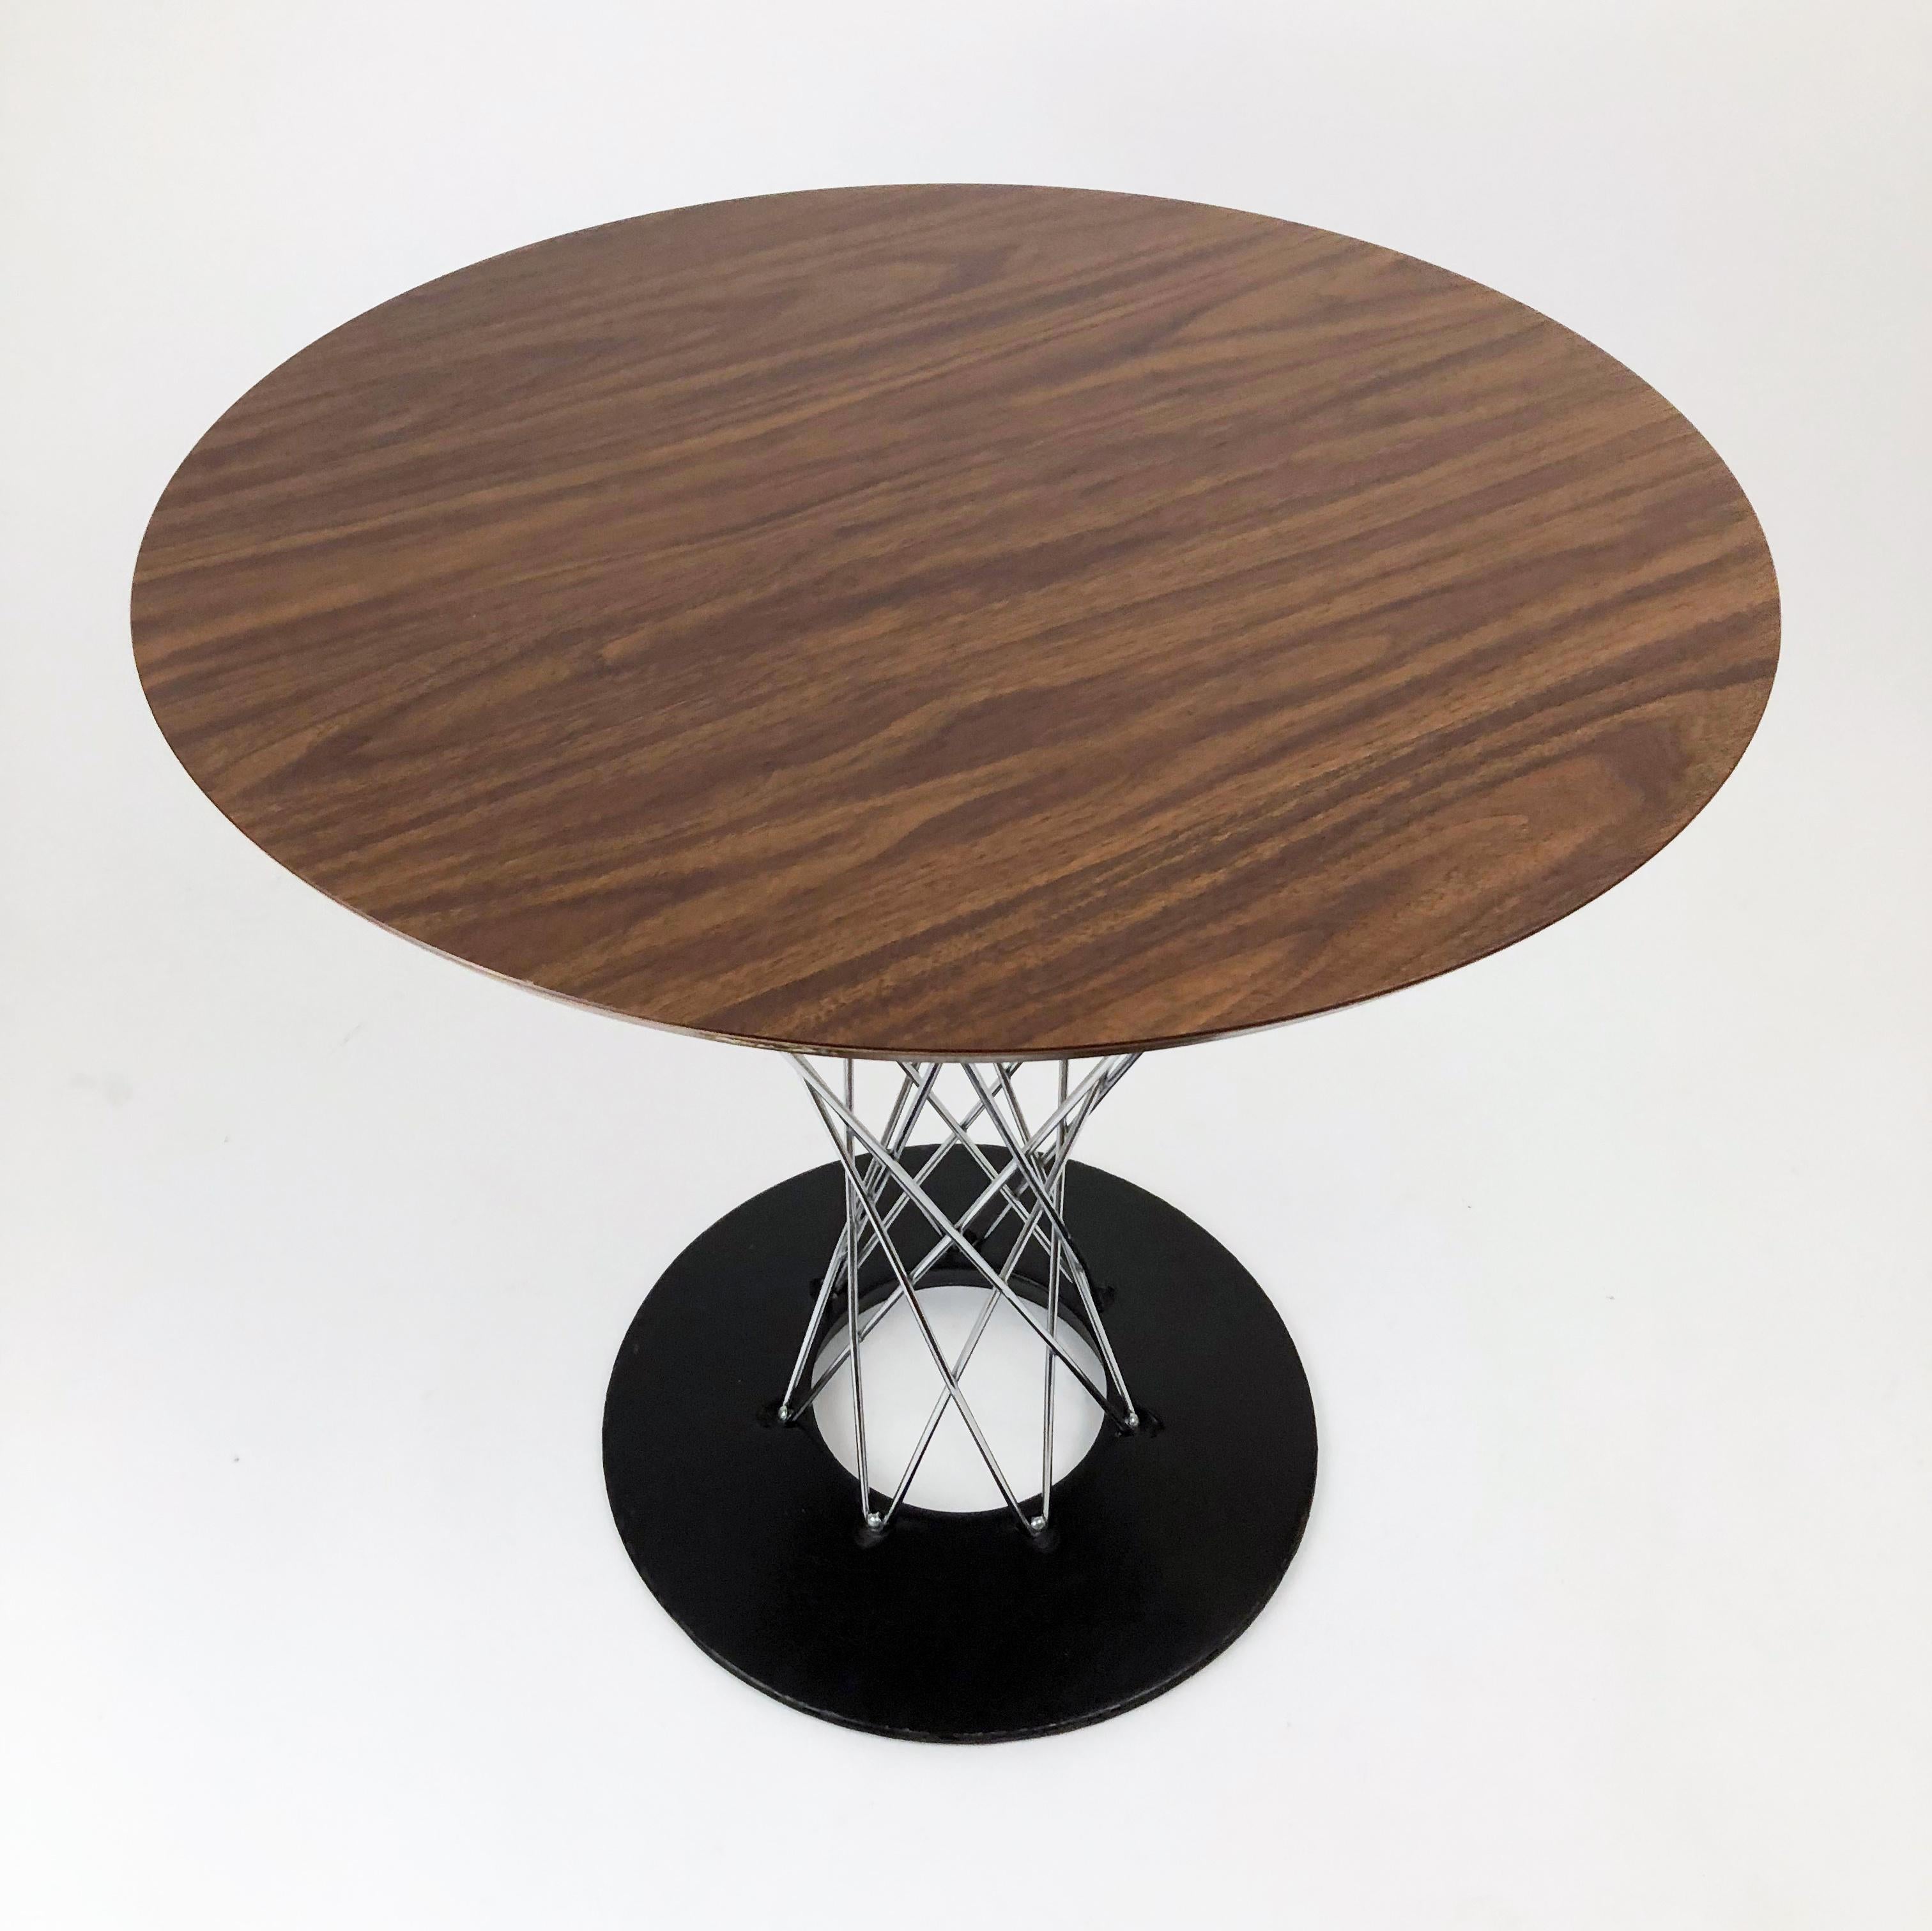 20th Century Cyclone Dining Table by Isamu Noguchi for Knoll